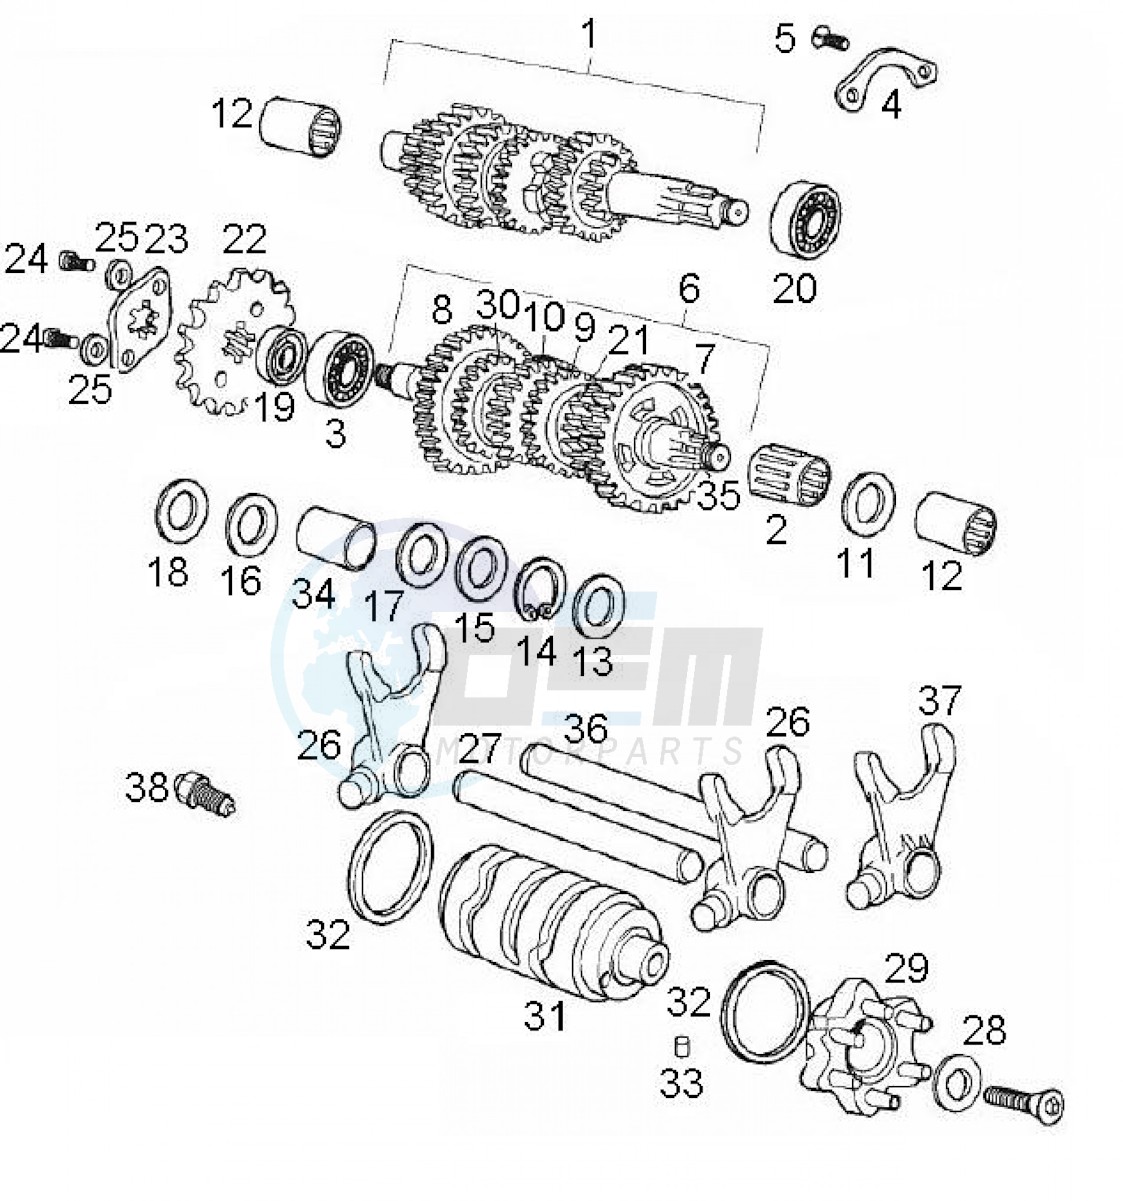 Gear box (Positions) image